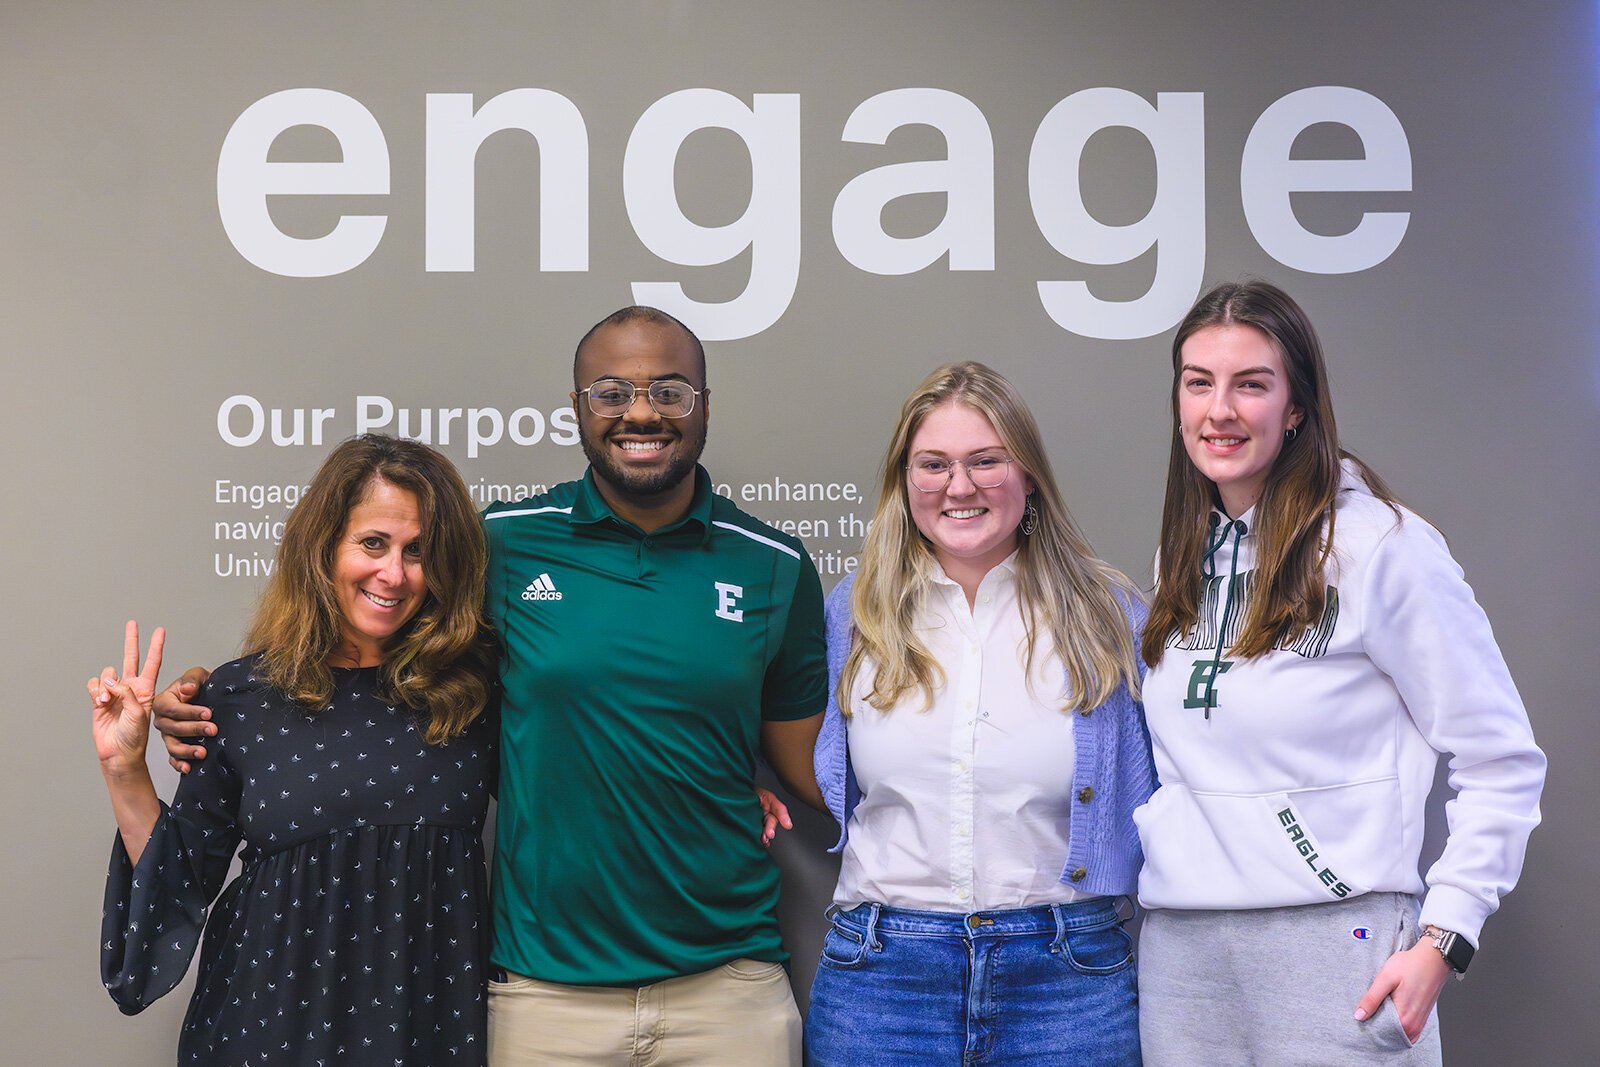 Decky Alexander, Lamarr Mitchell, Maggie Whittemore, and Meagan Raupp at the Engage @ EMU offices.